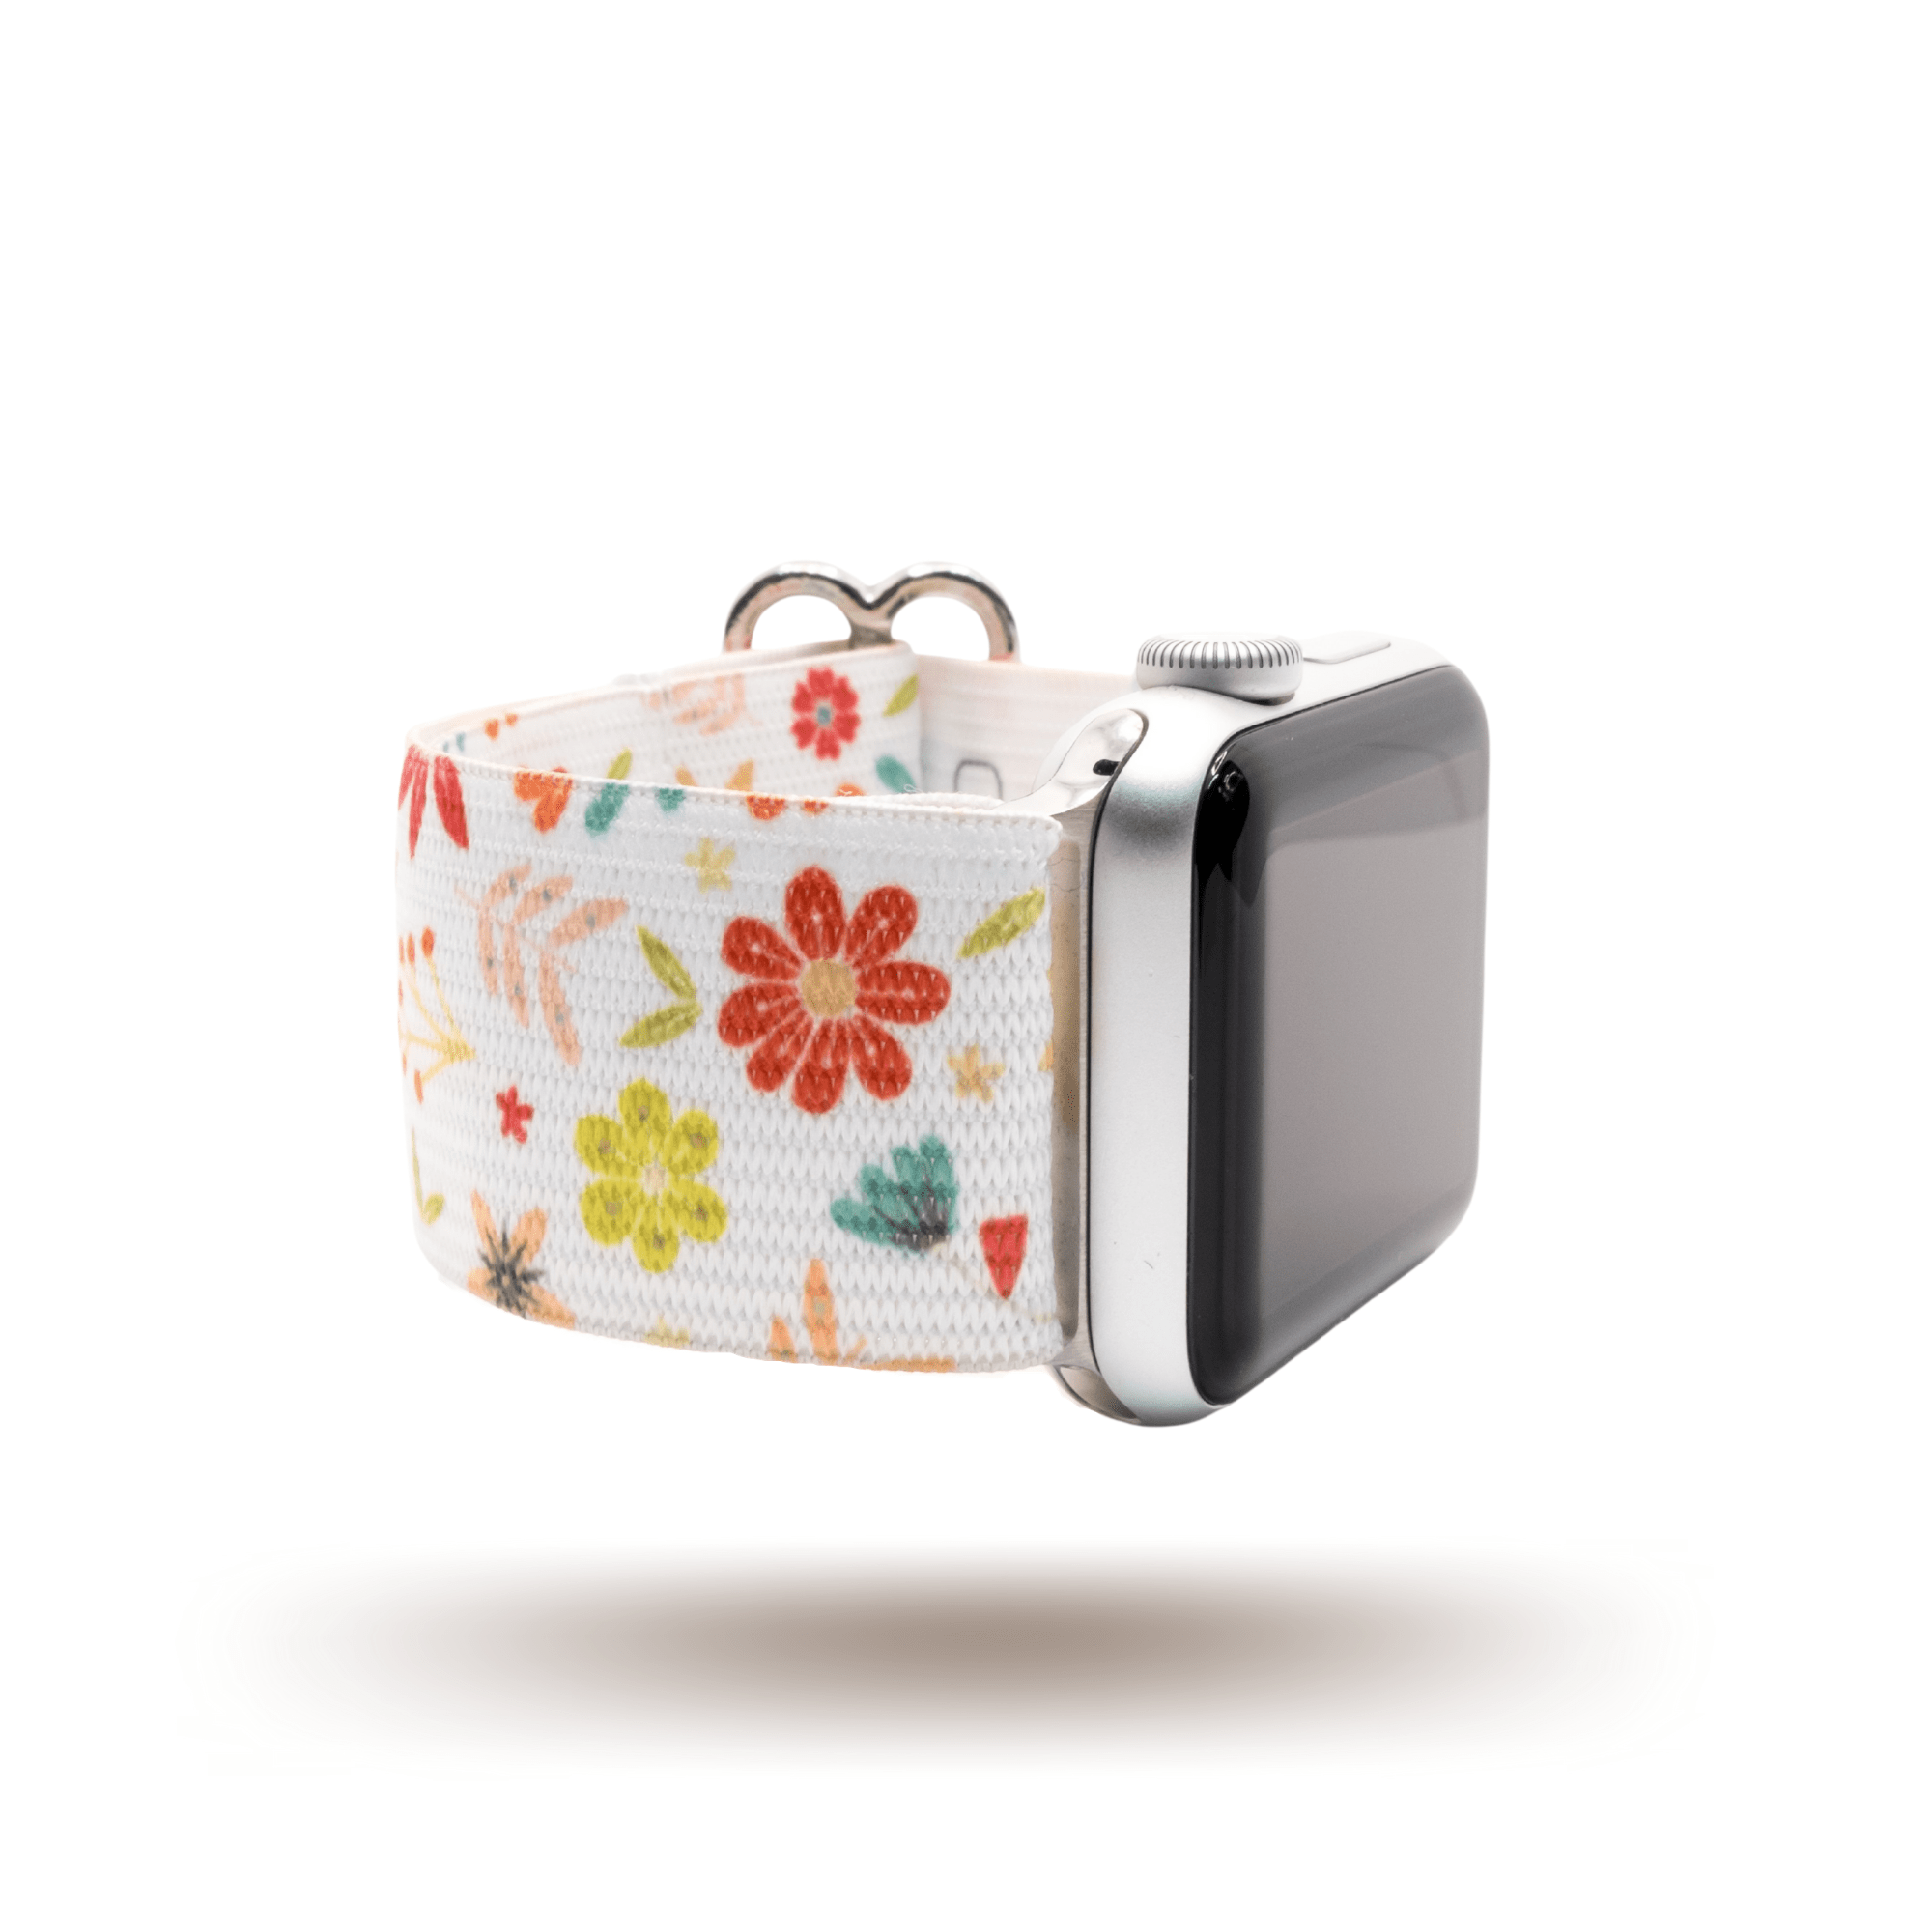 Spring Floral Adjustable Elastic Band for Apple Watch, Fitbit